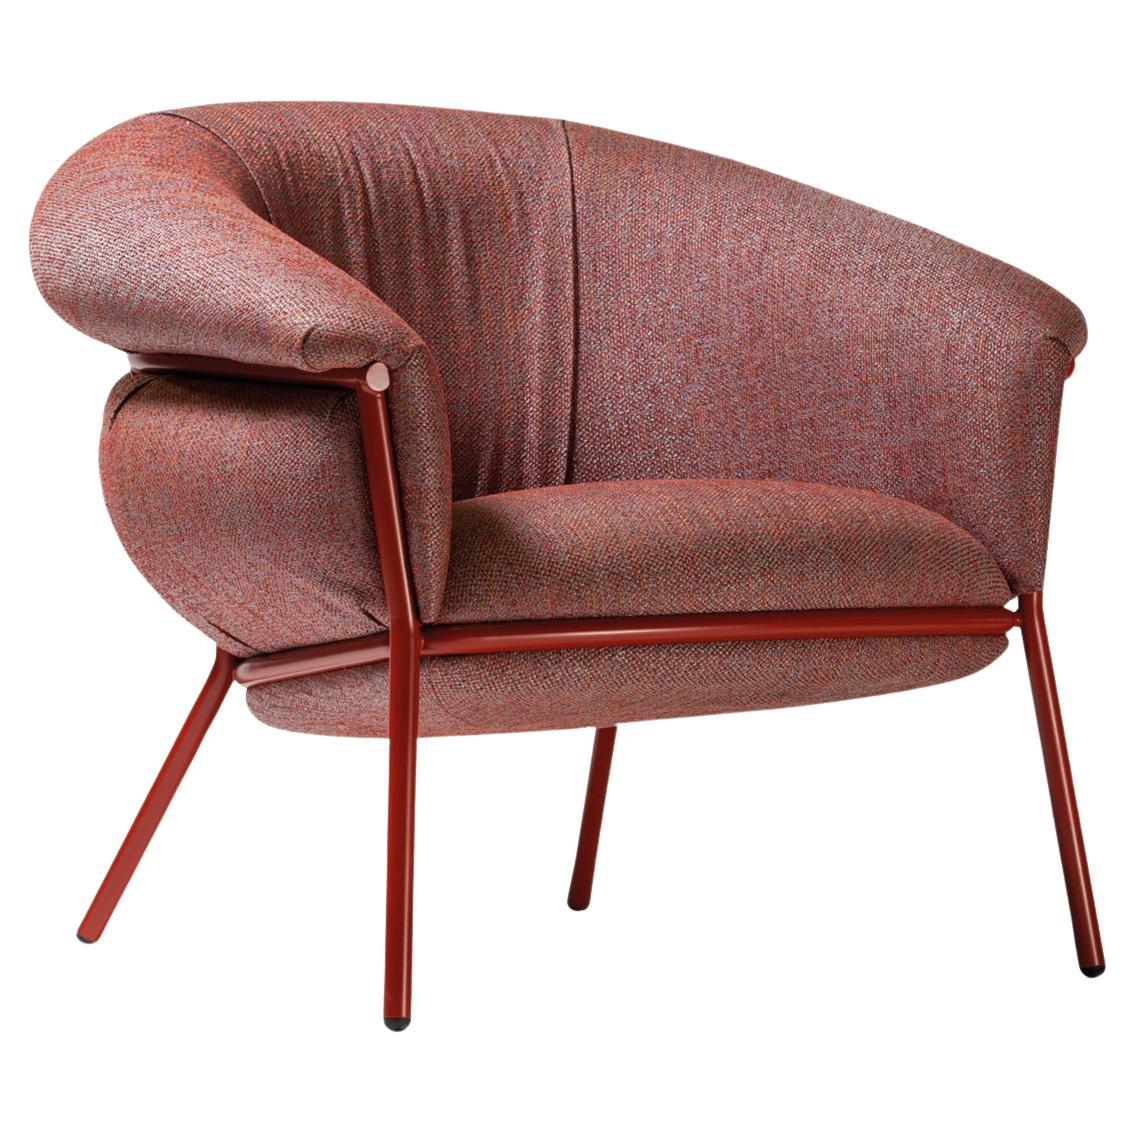 Grasso Armchair by Stephen Burks padded red upholstery with a red metal structur